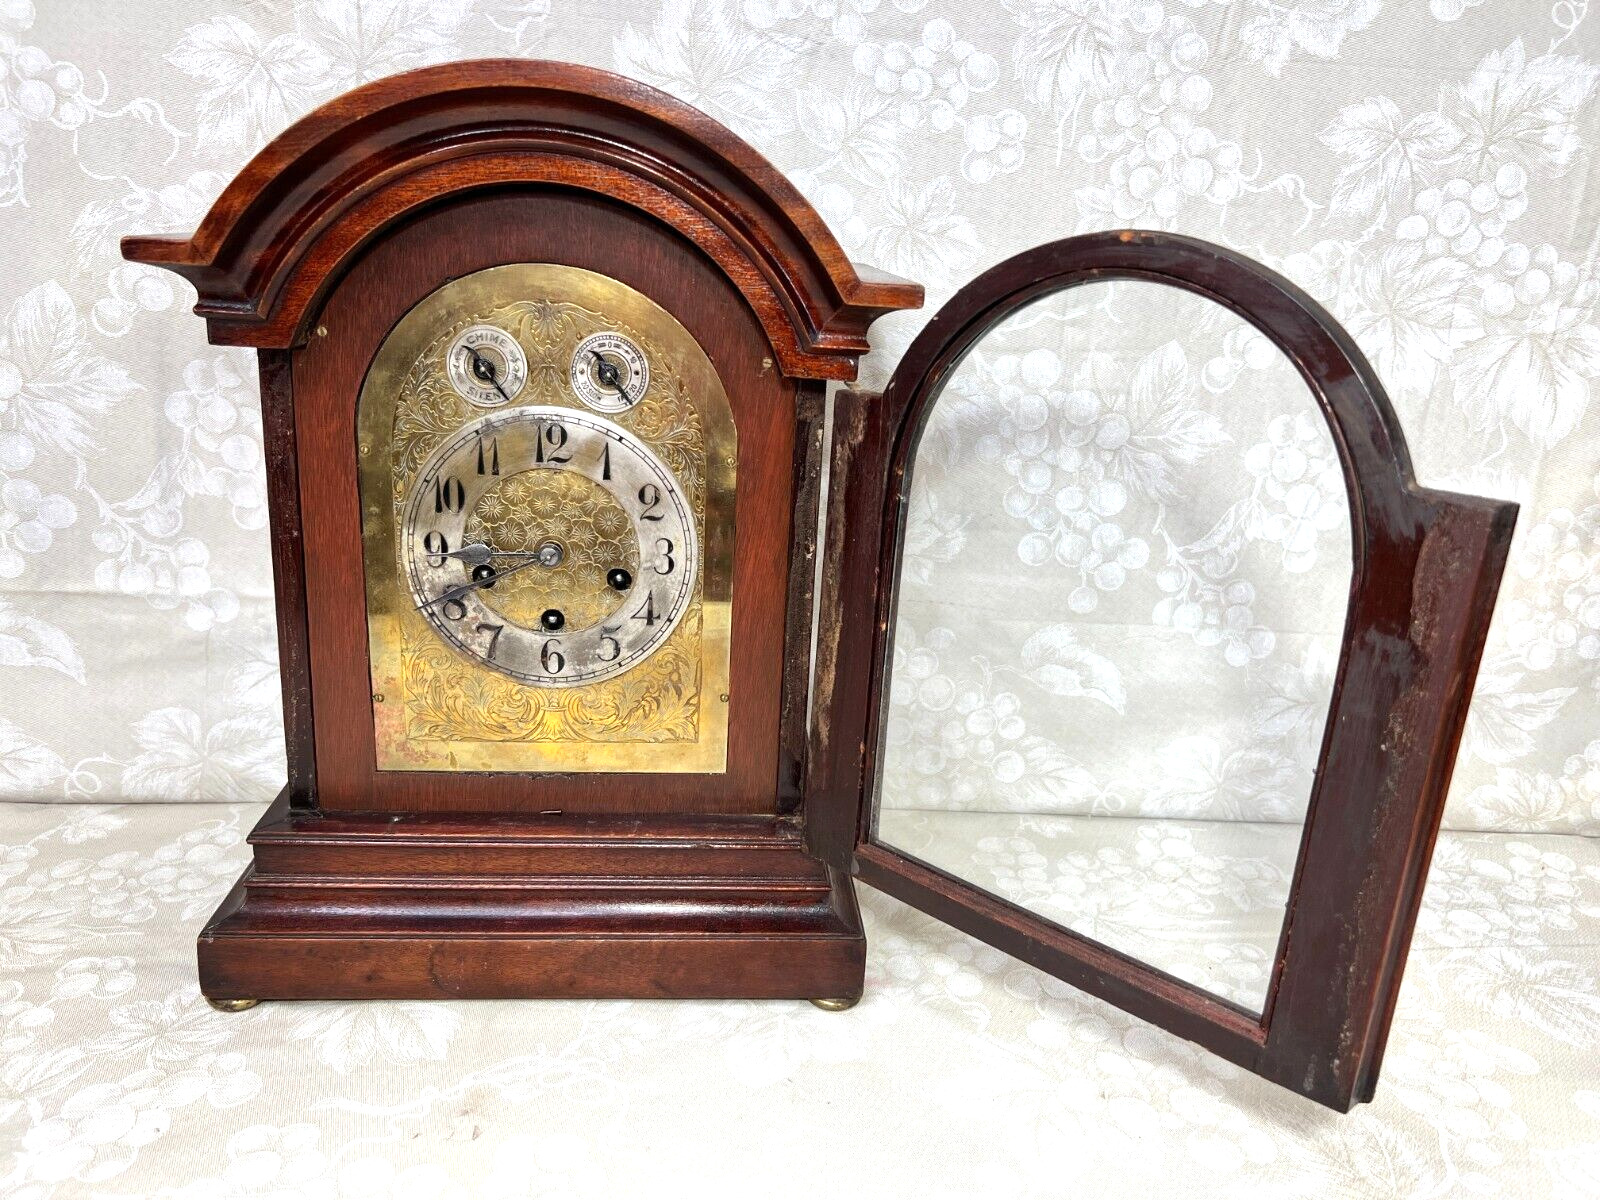 Antique Junghans 3 Wind Mantel Clock Westminster Chimes Rounded Top Case Runs?